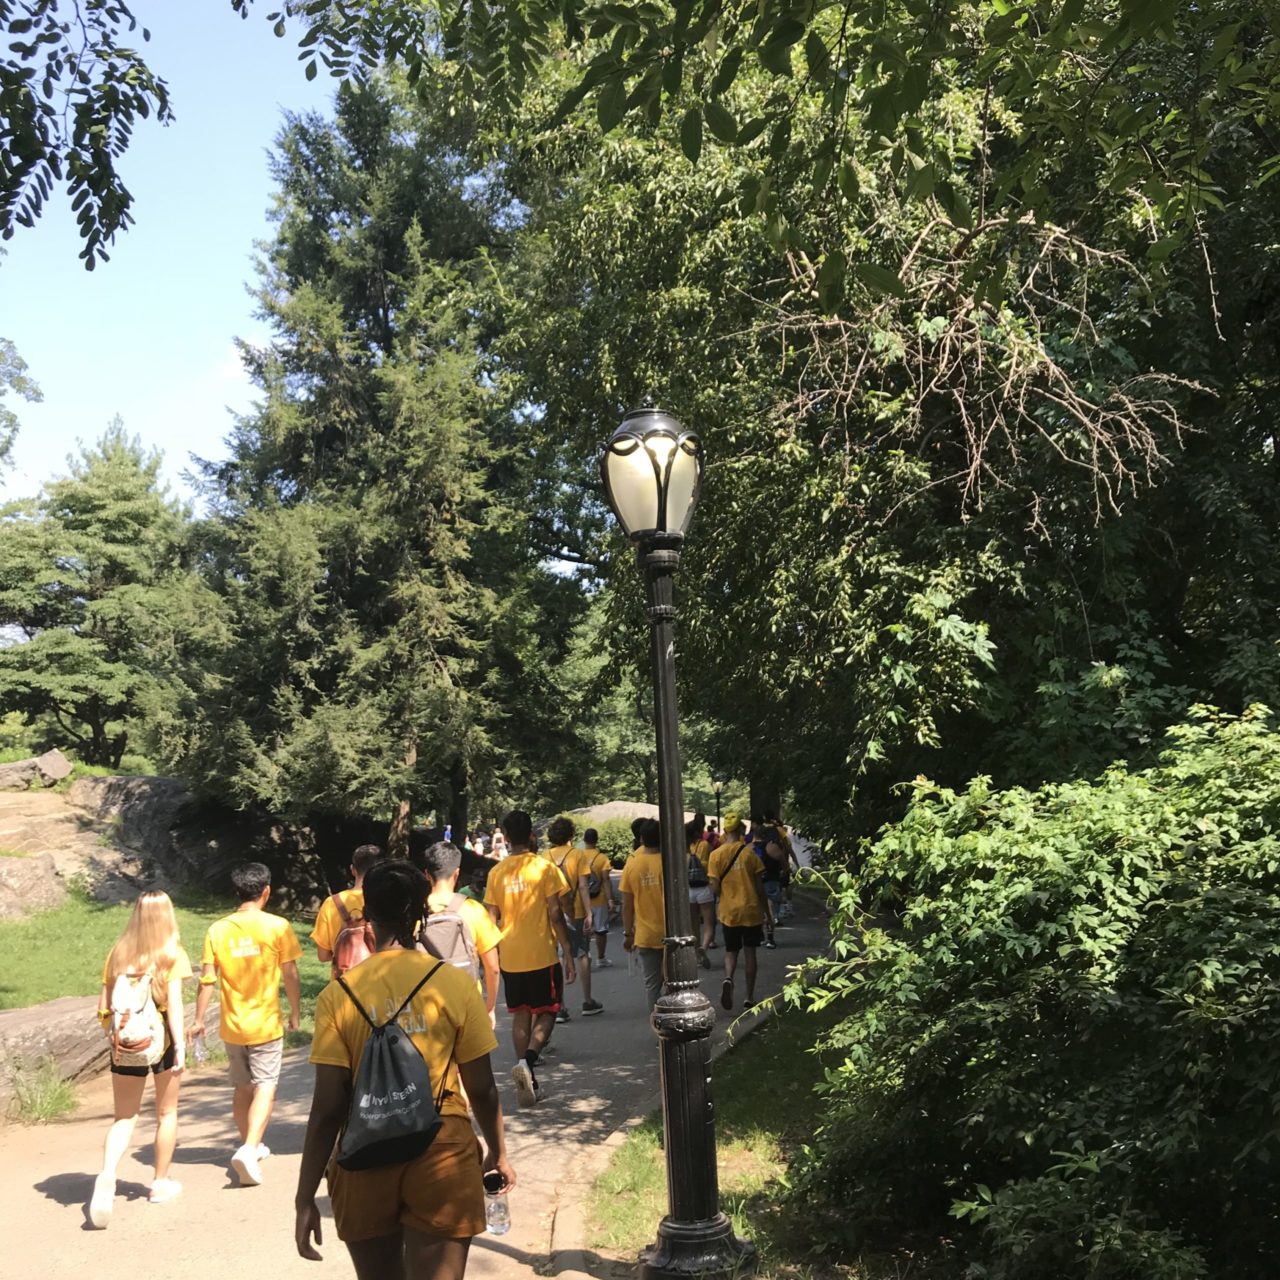 Students walking through a park during orientation.